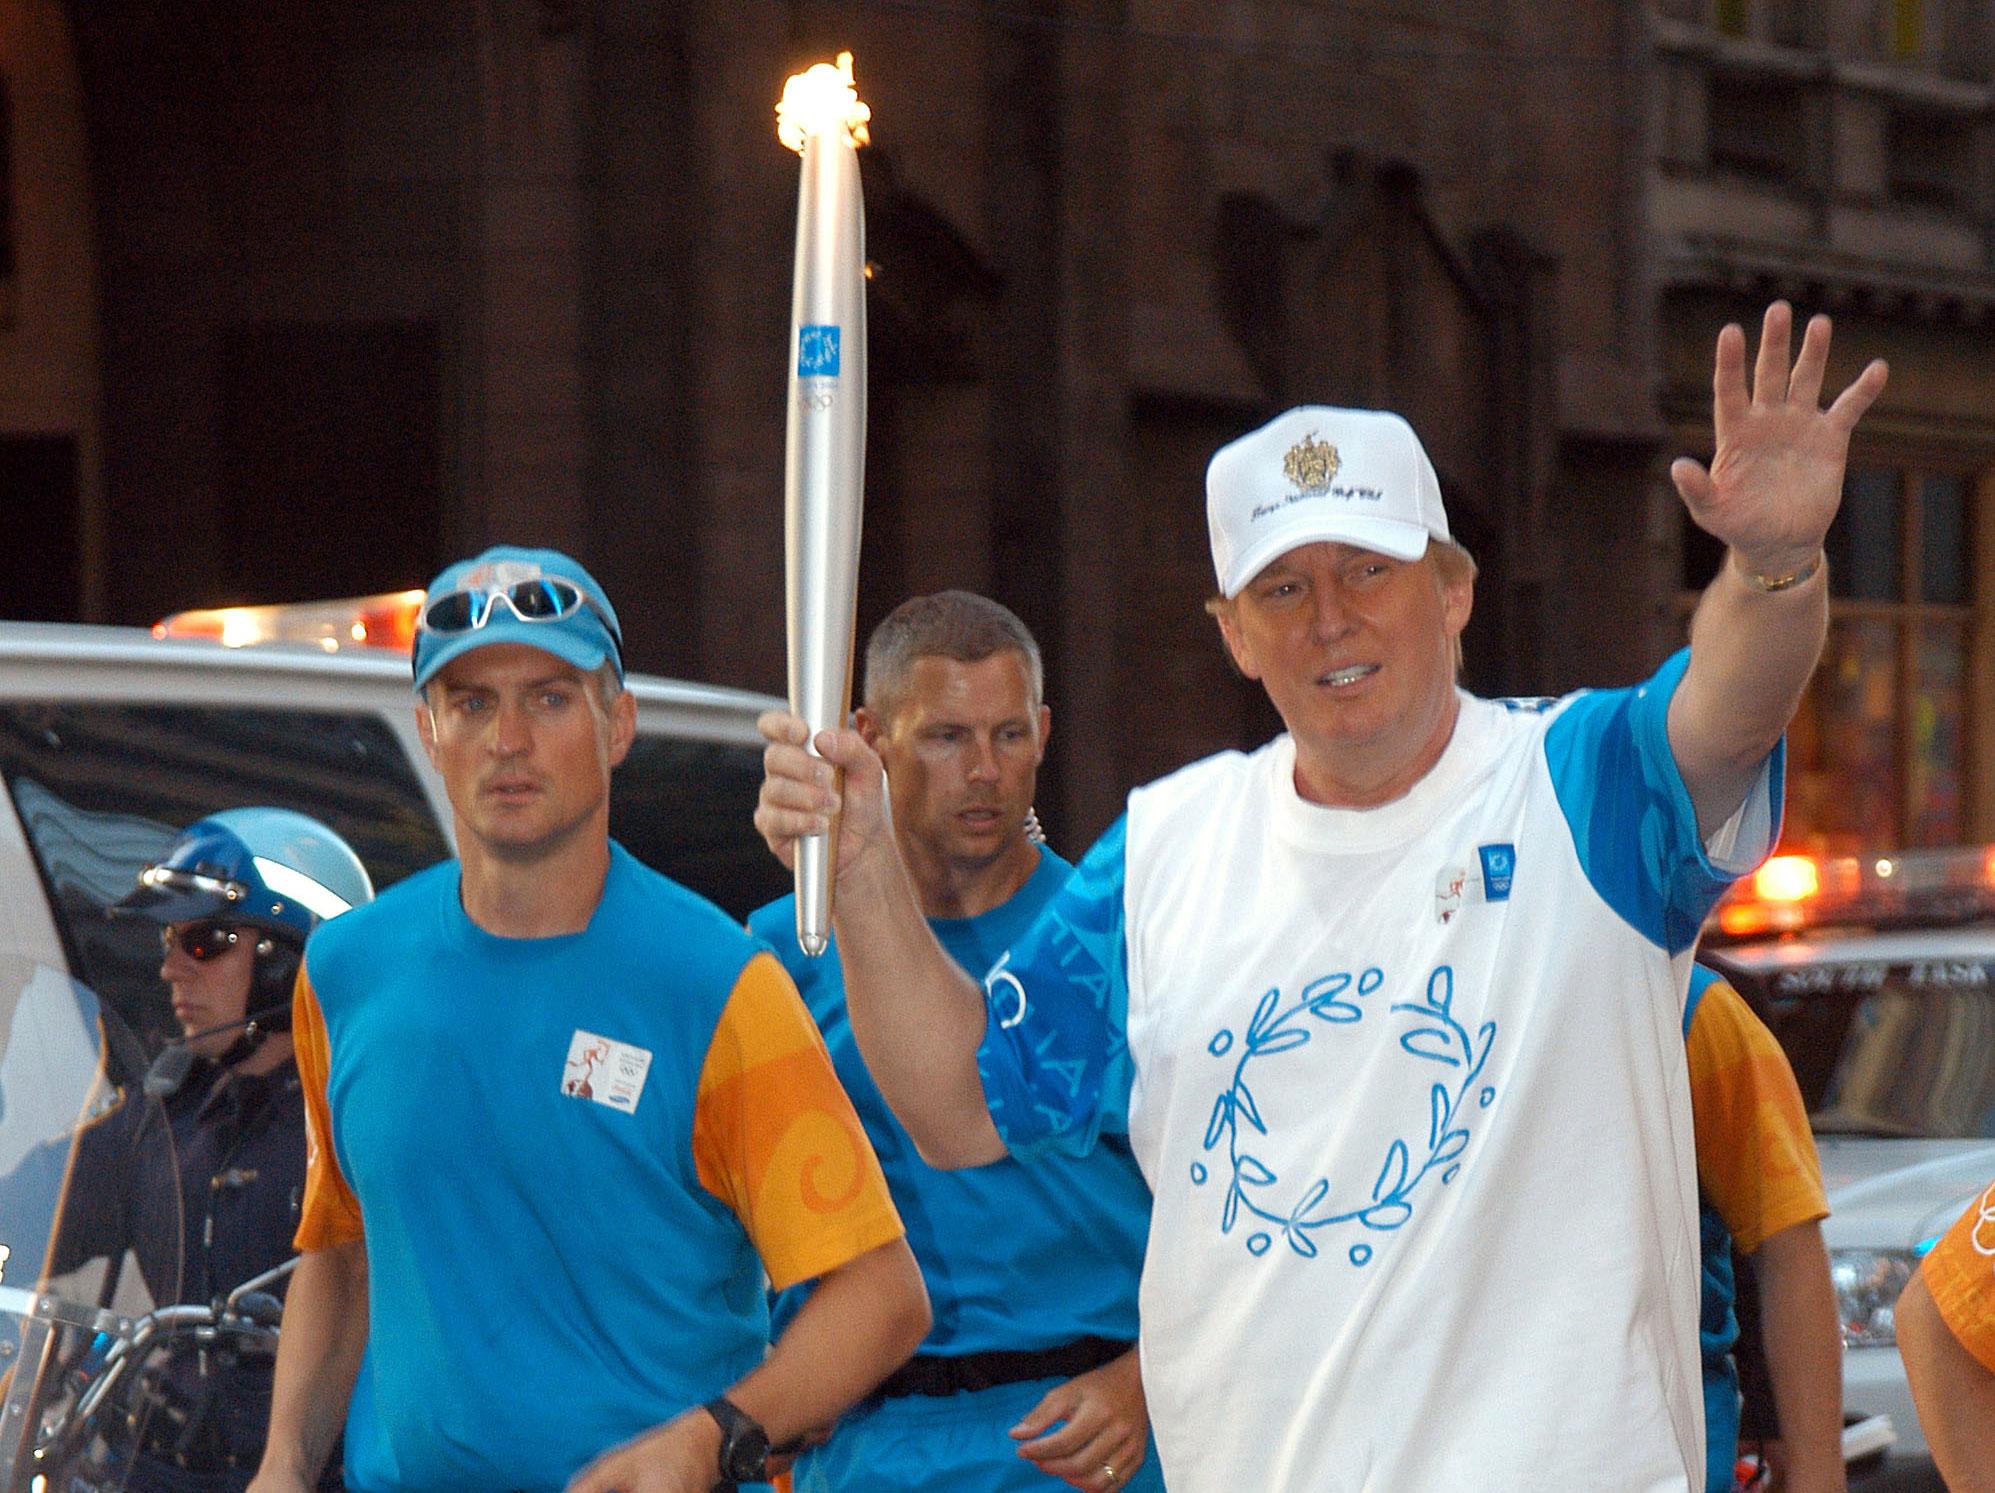 Trump carries the torch in New York prior to the 2004 Olympics in Athens Bryan Bedder/Getty